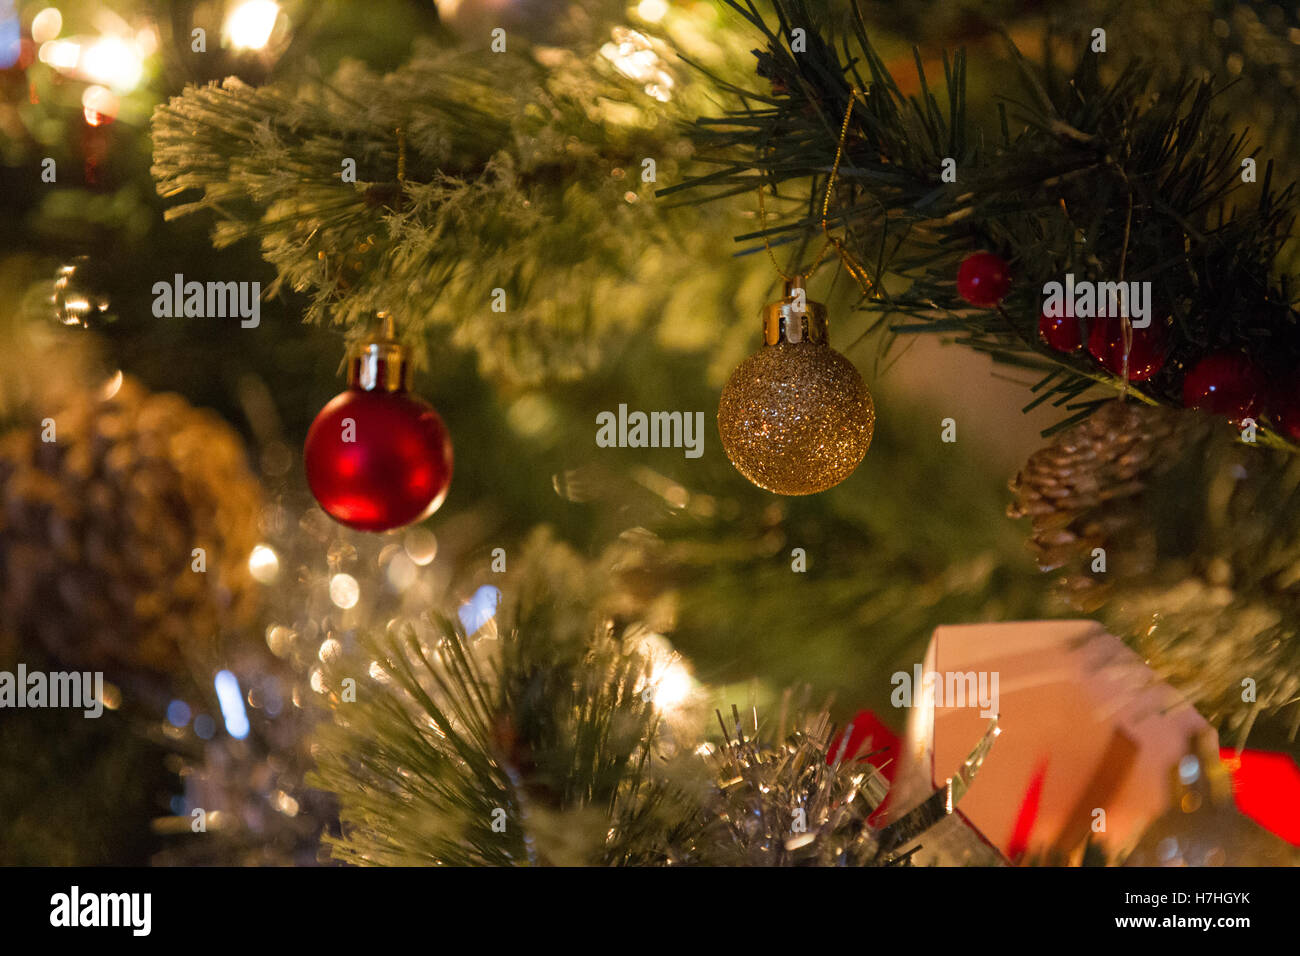 gold and red coloured baubles hanging on a Christmas tree Stock Photo